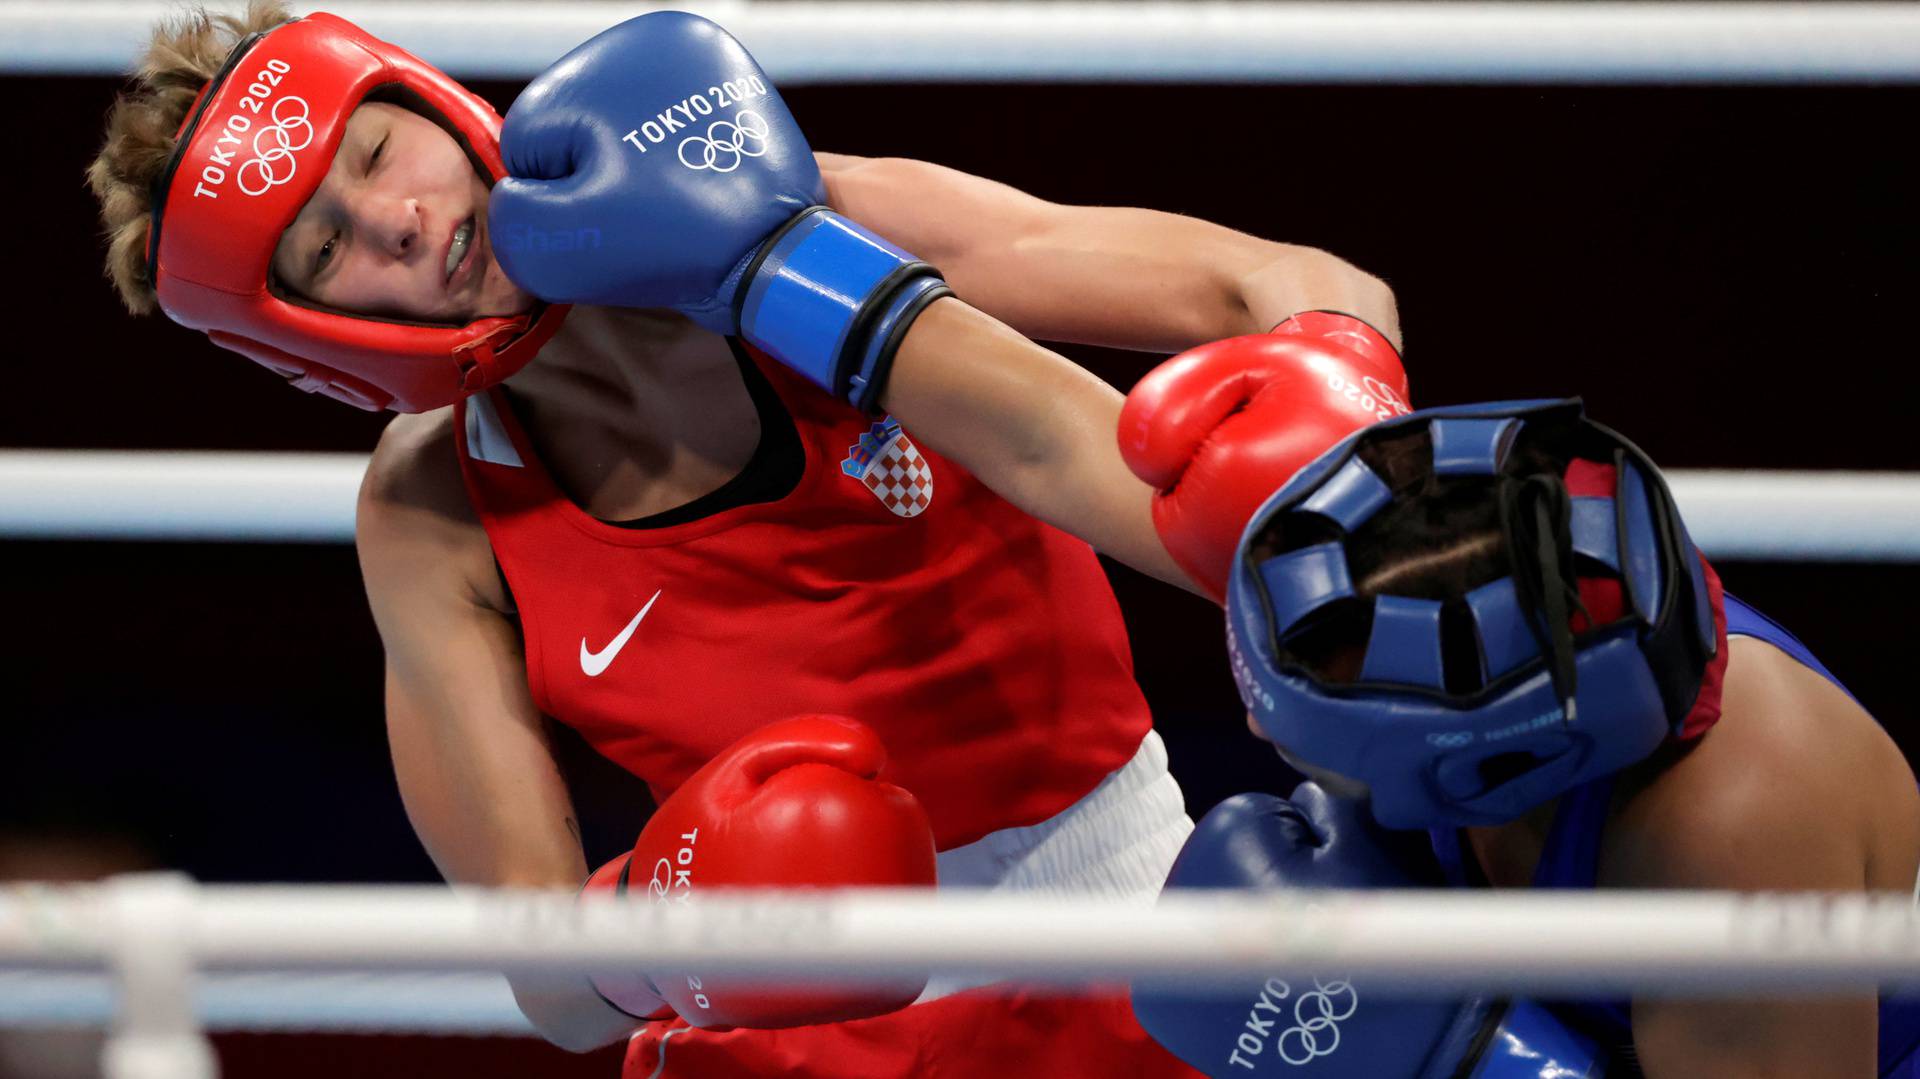 Boxing - Women's Featherweight - Last 32